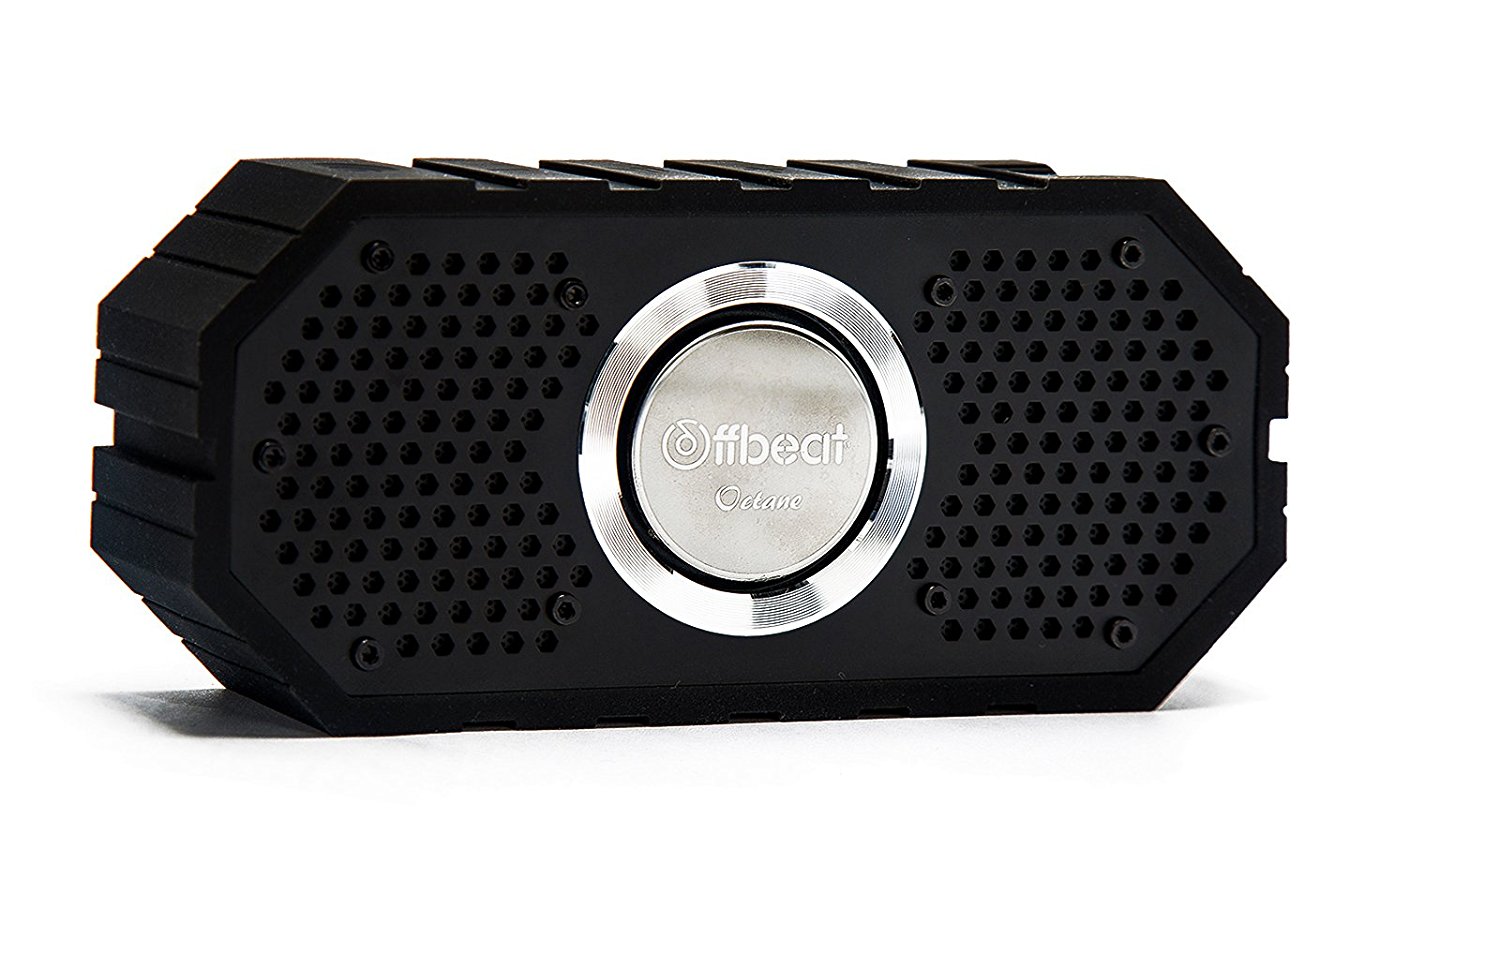 Amazon: Buy Offbeat® – Octane 6W Splash-proof Wireless Portable Bluetooth Speaker at Rs 1190 only